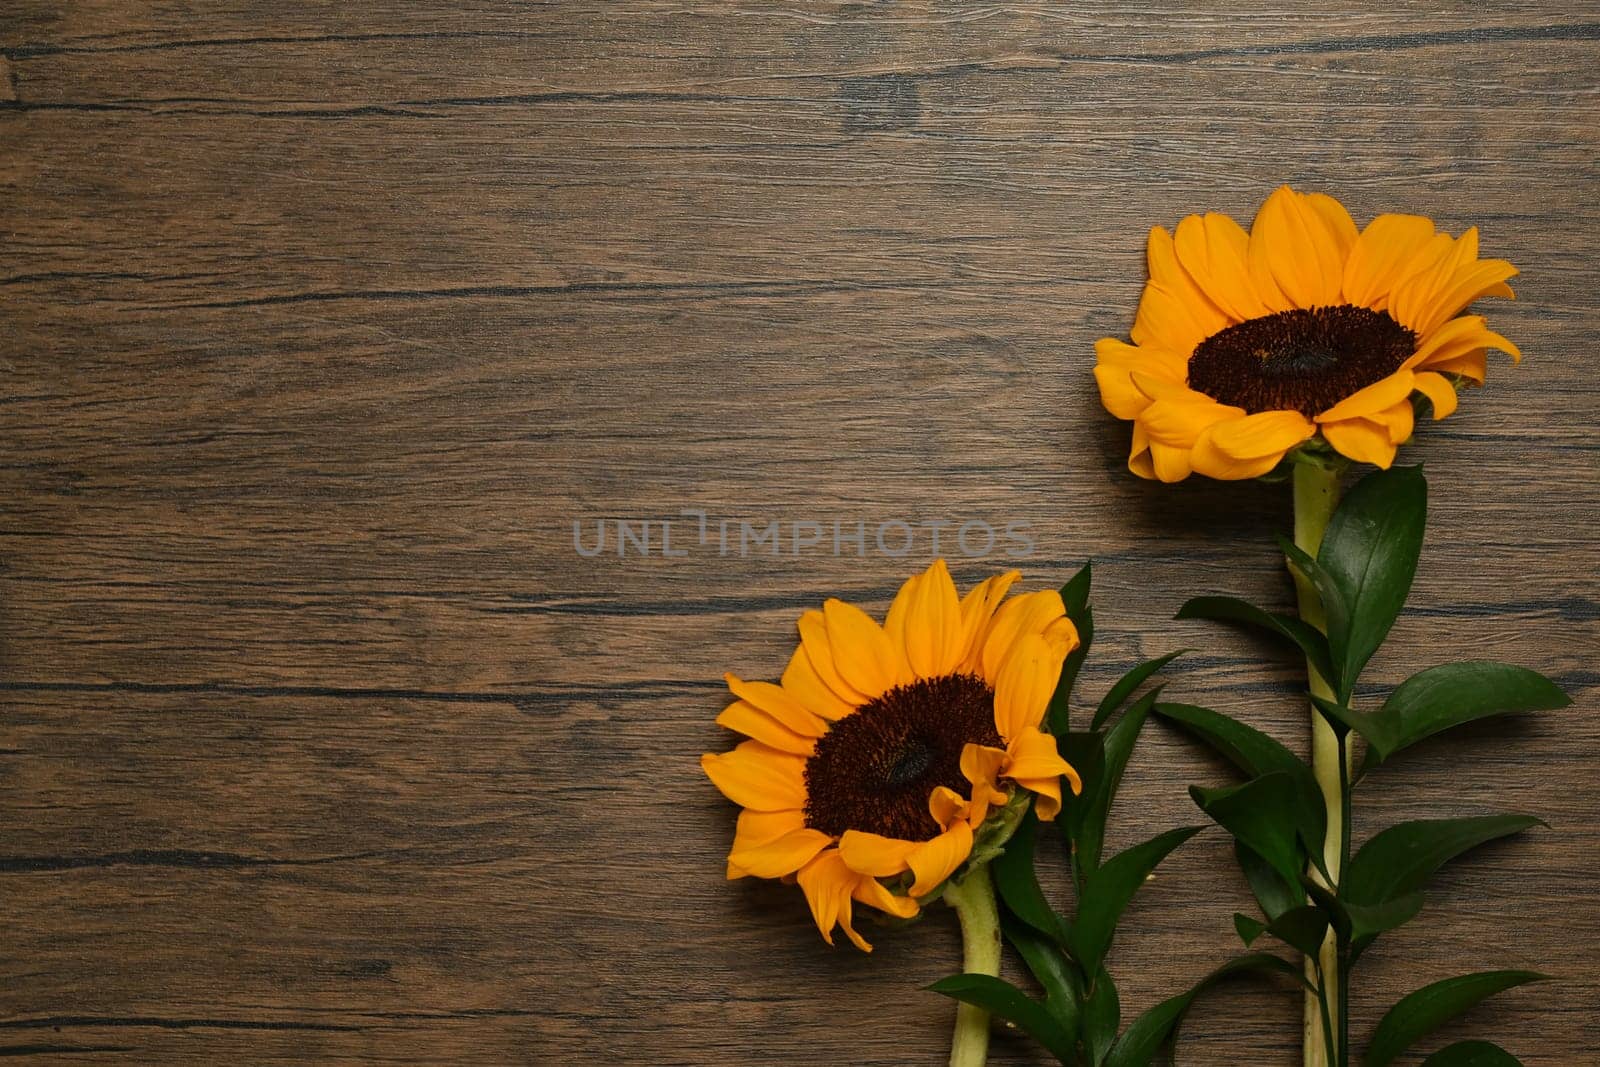 Fresh sunflowers with leaves and stalk on wooden background with copy space. Natural background, autumn or summer concept.